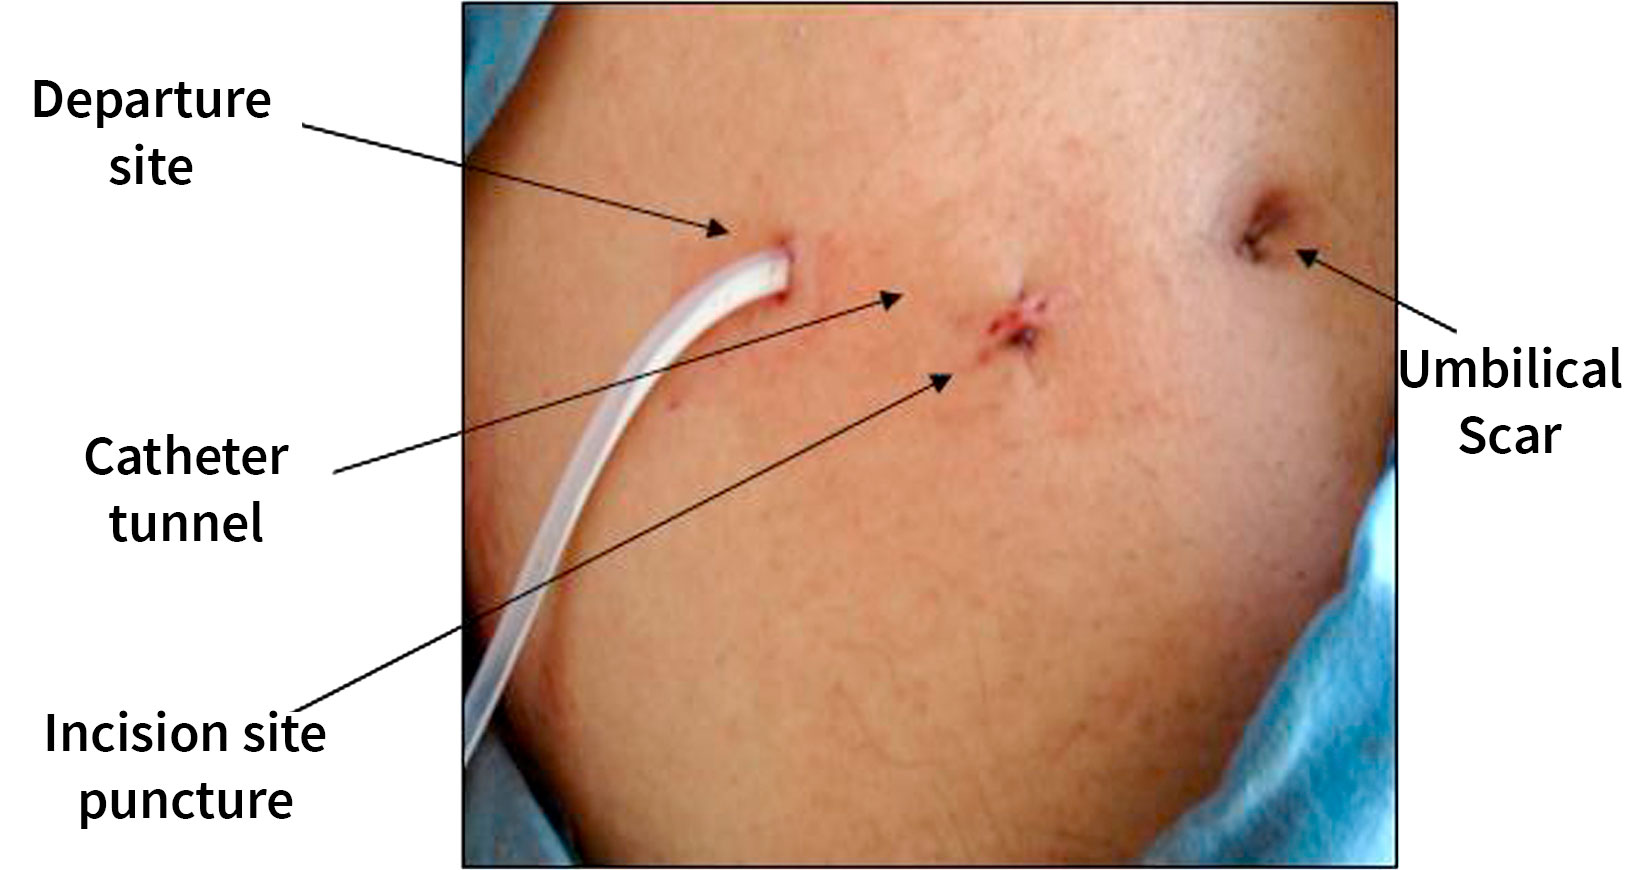 Installation of the catheter by percutaneous insertion